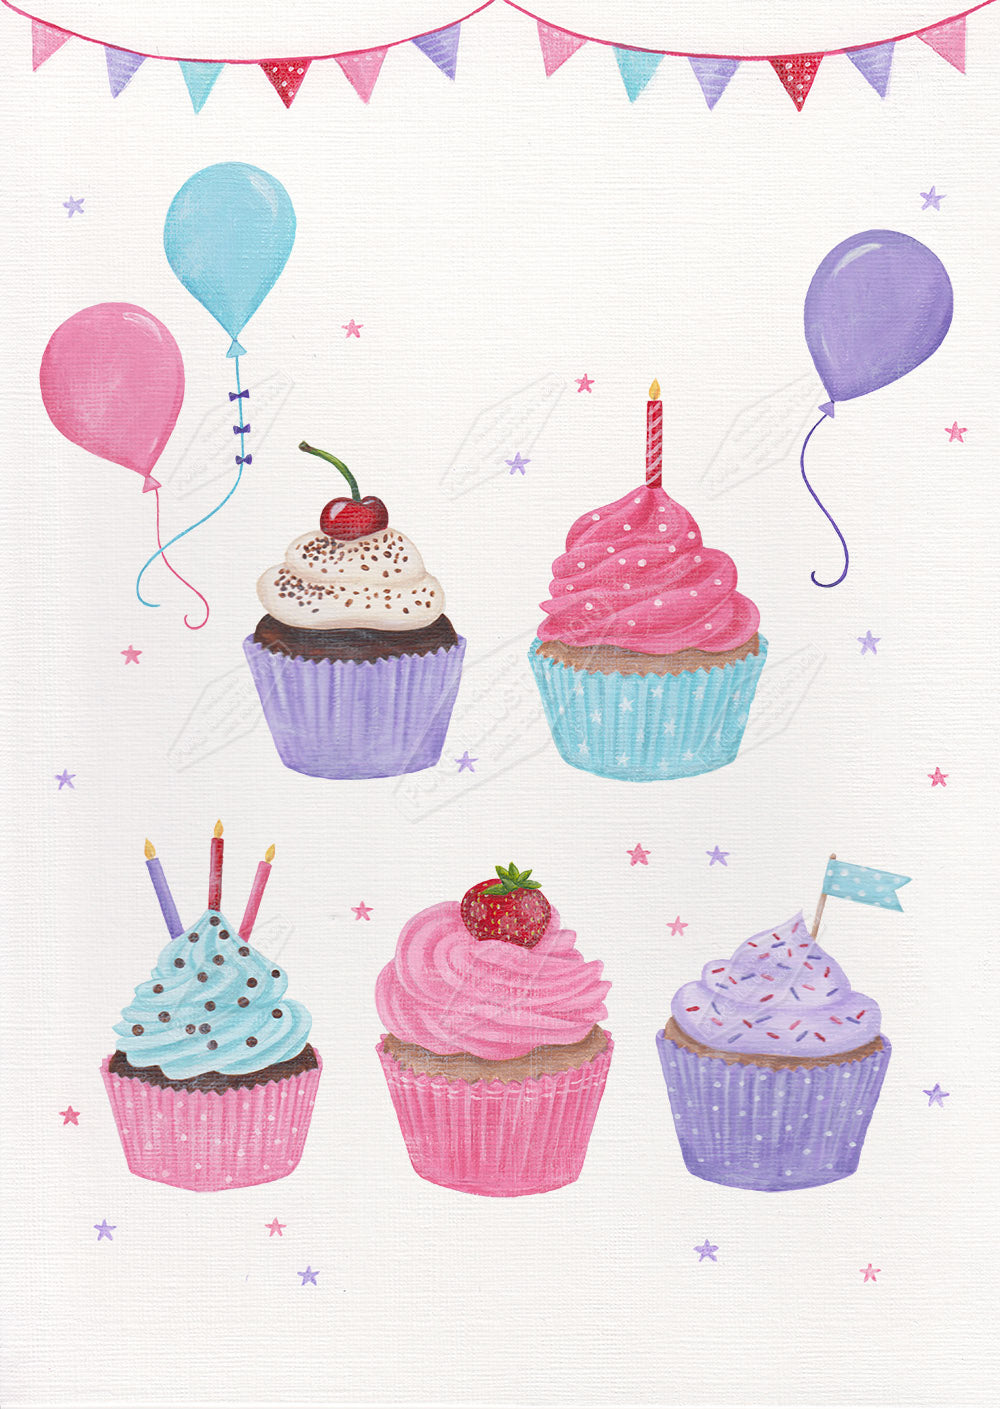 00028773AAI - Birthday Cupcakes Illustration by Anna Aitken - Pure Art Licensing Agency & Surface Design Studio